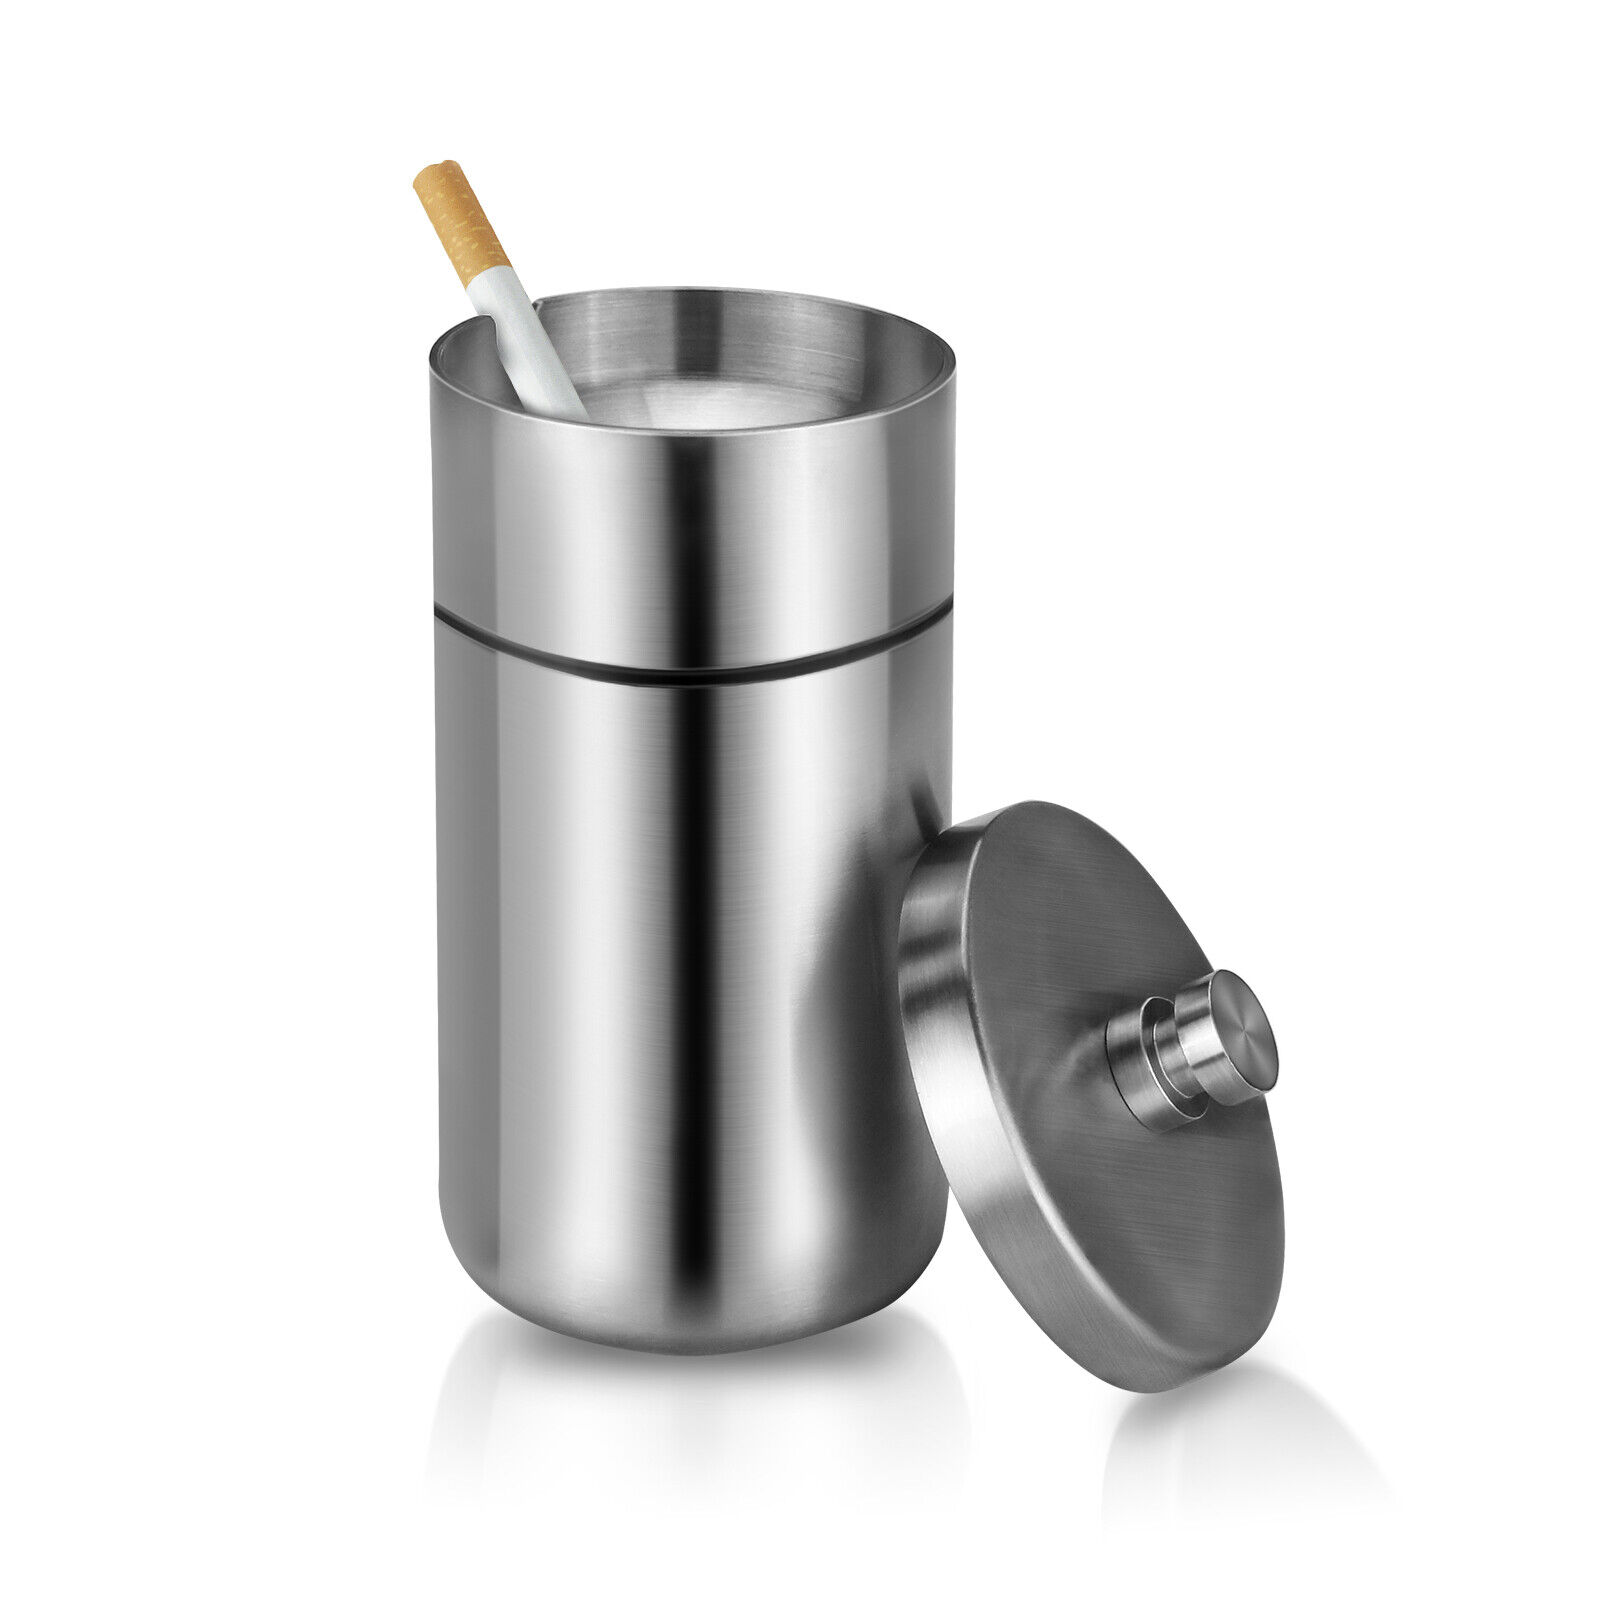 Car Ashtray with Lid Stainless Steel Cigarette Ashtrays for Auto Cup Holder Wind